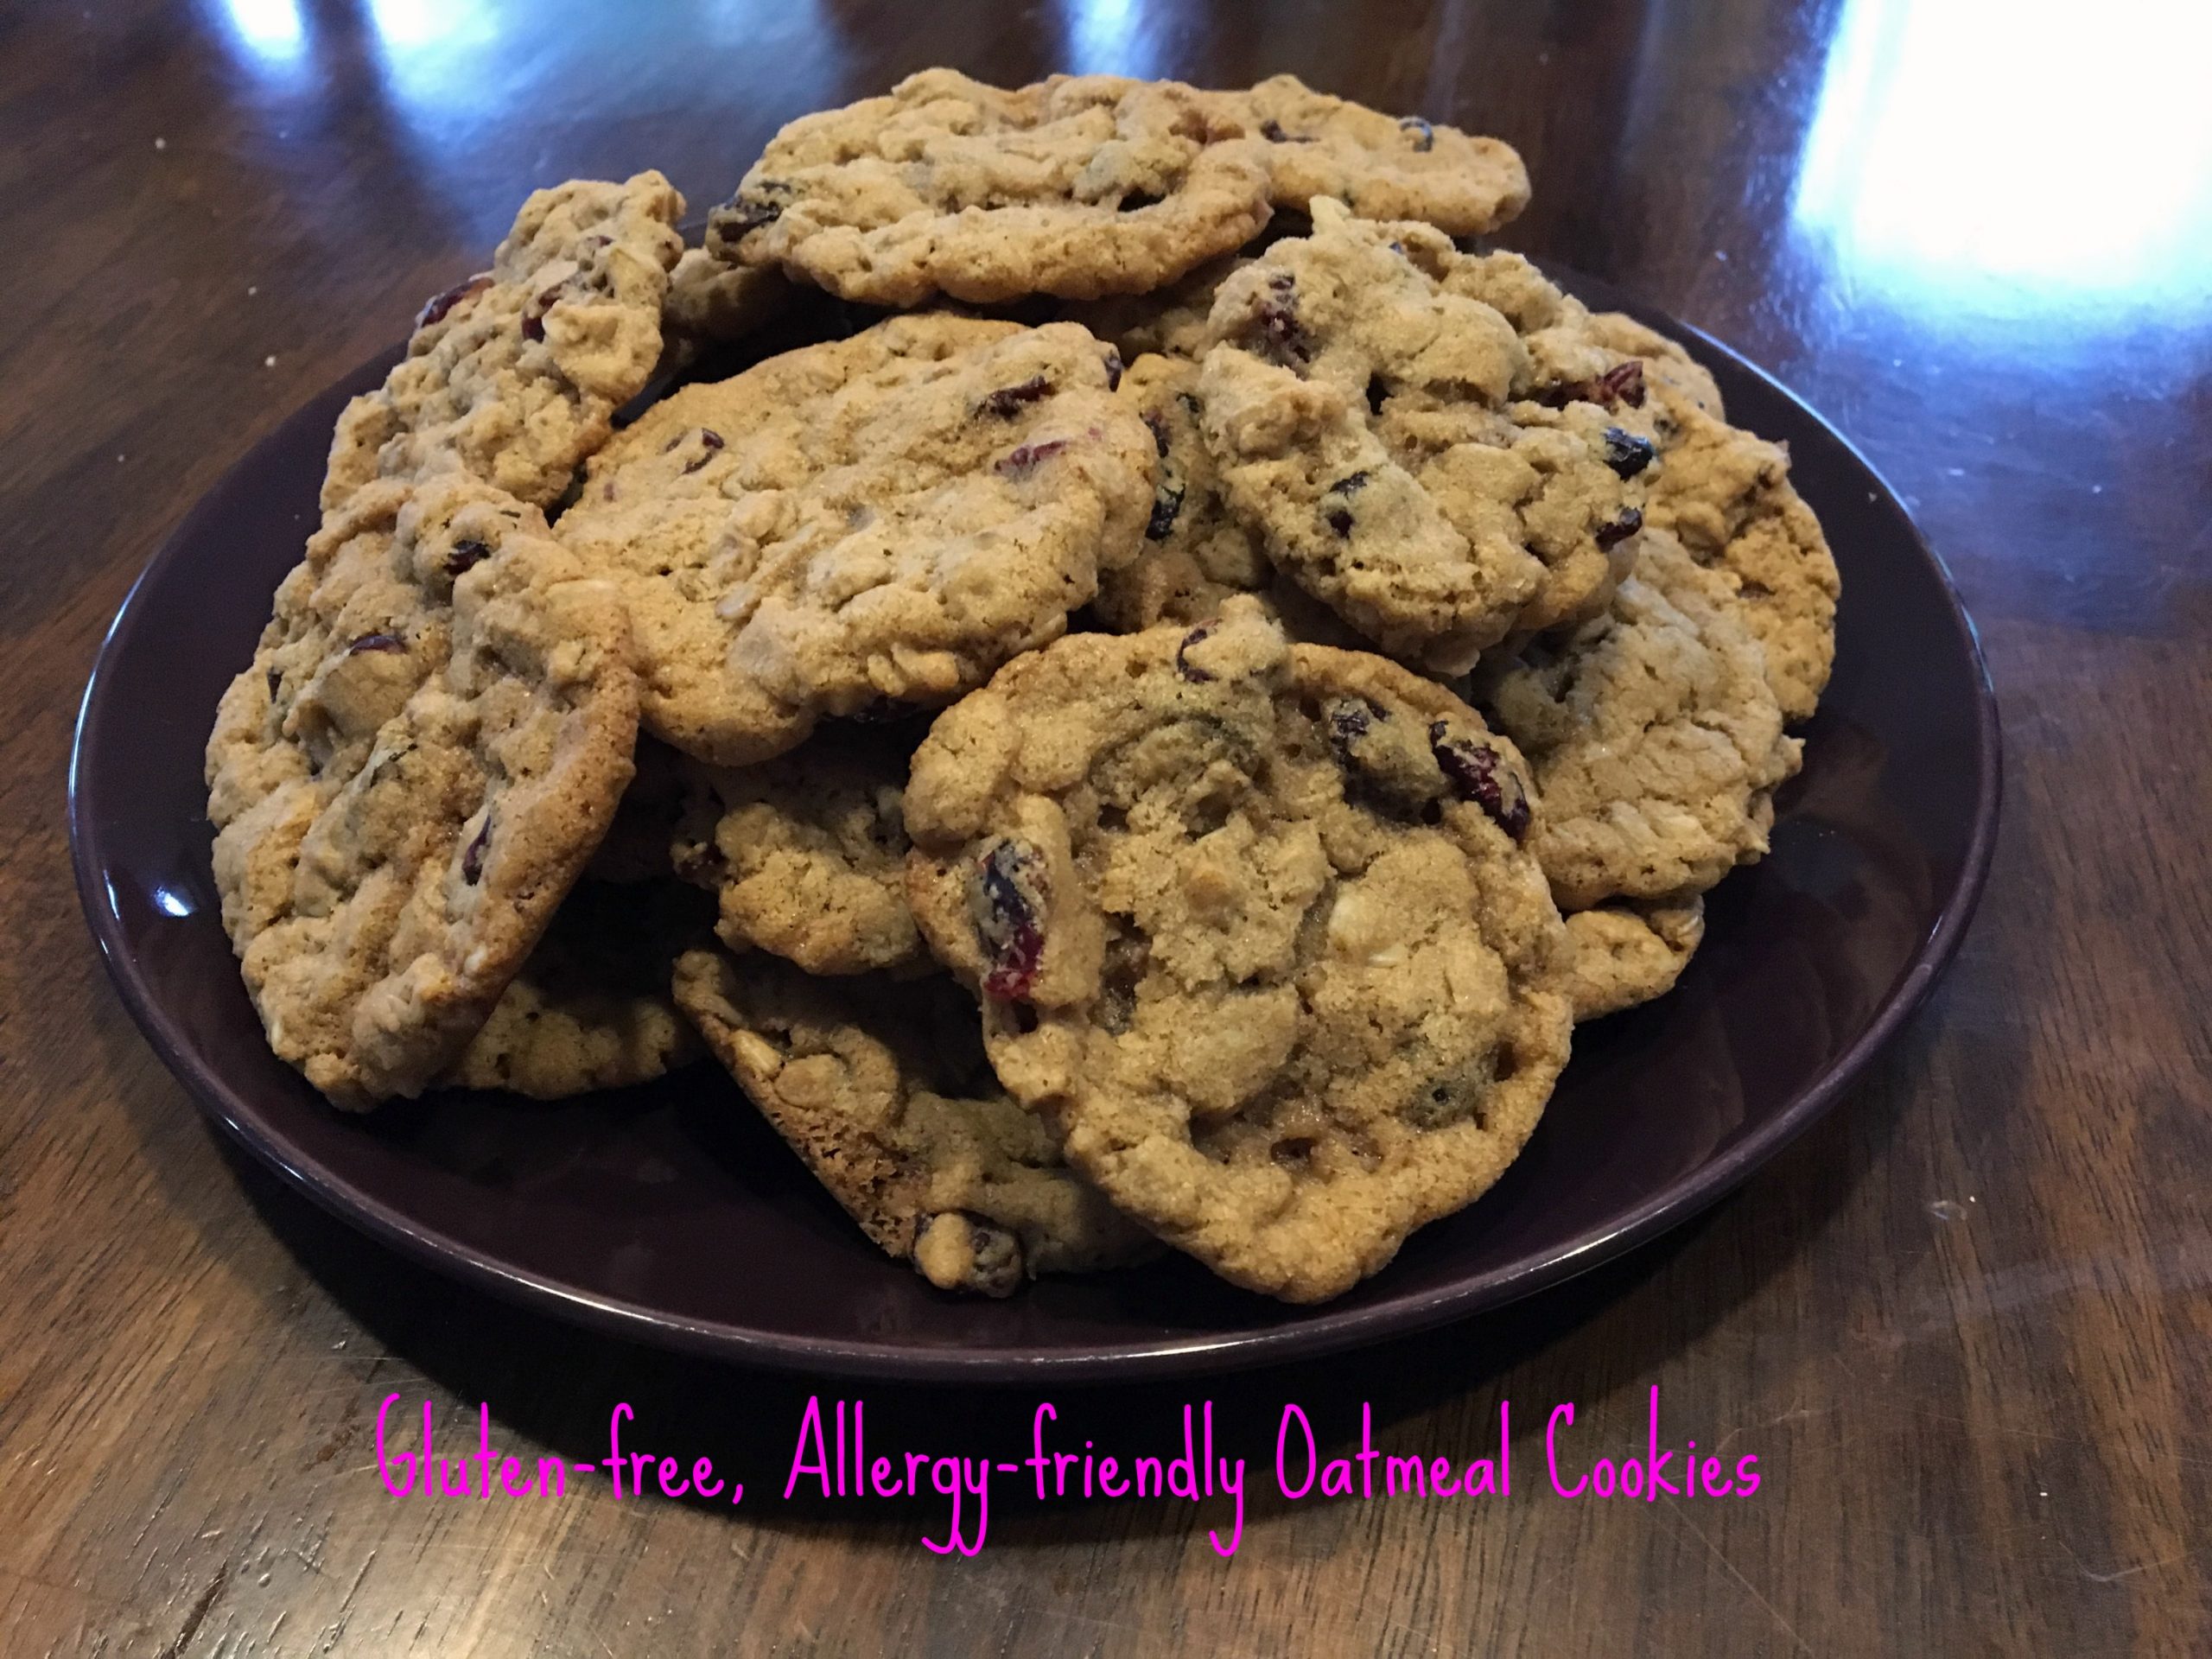 You are currently viewing Gluten-free Allergy-friendly Oatmeal Cookies